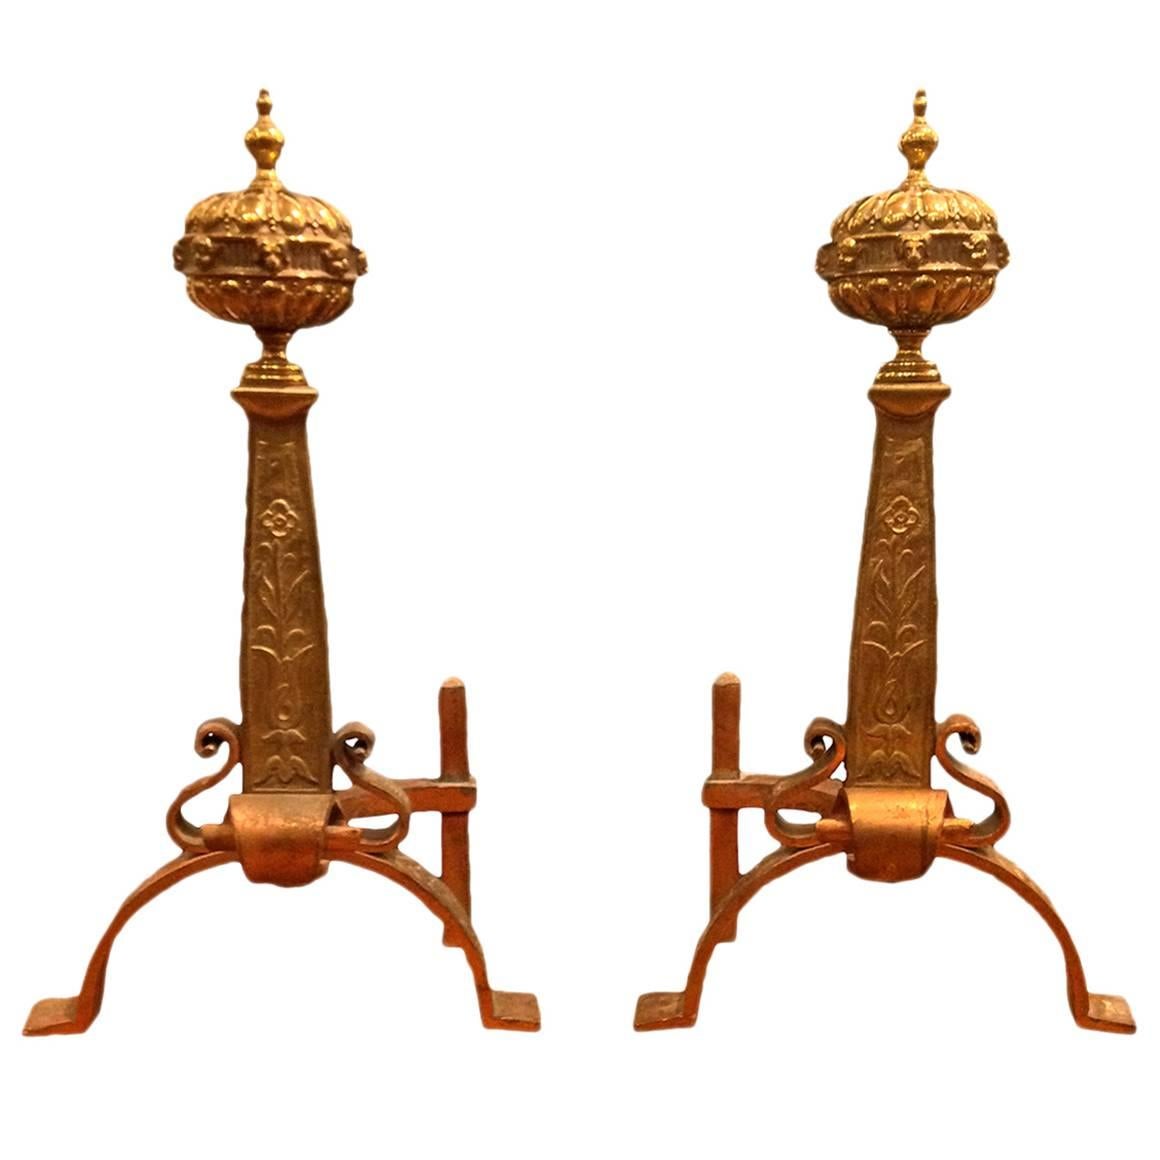 Pair of Brass and Copper 19th Century English Andirons